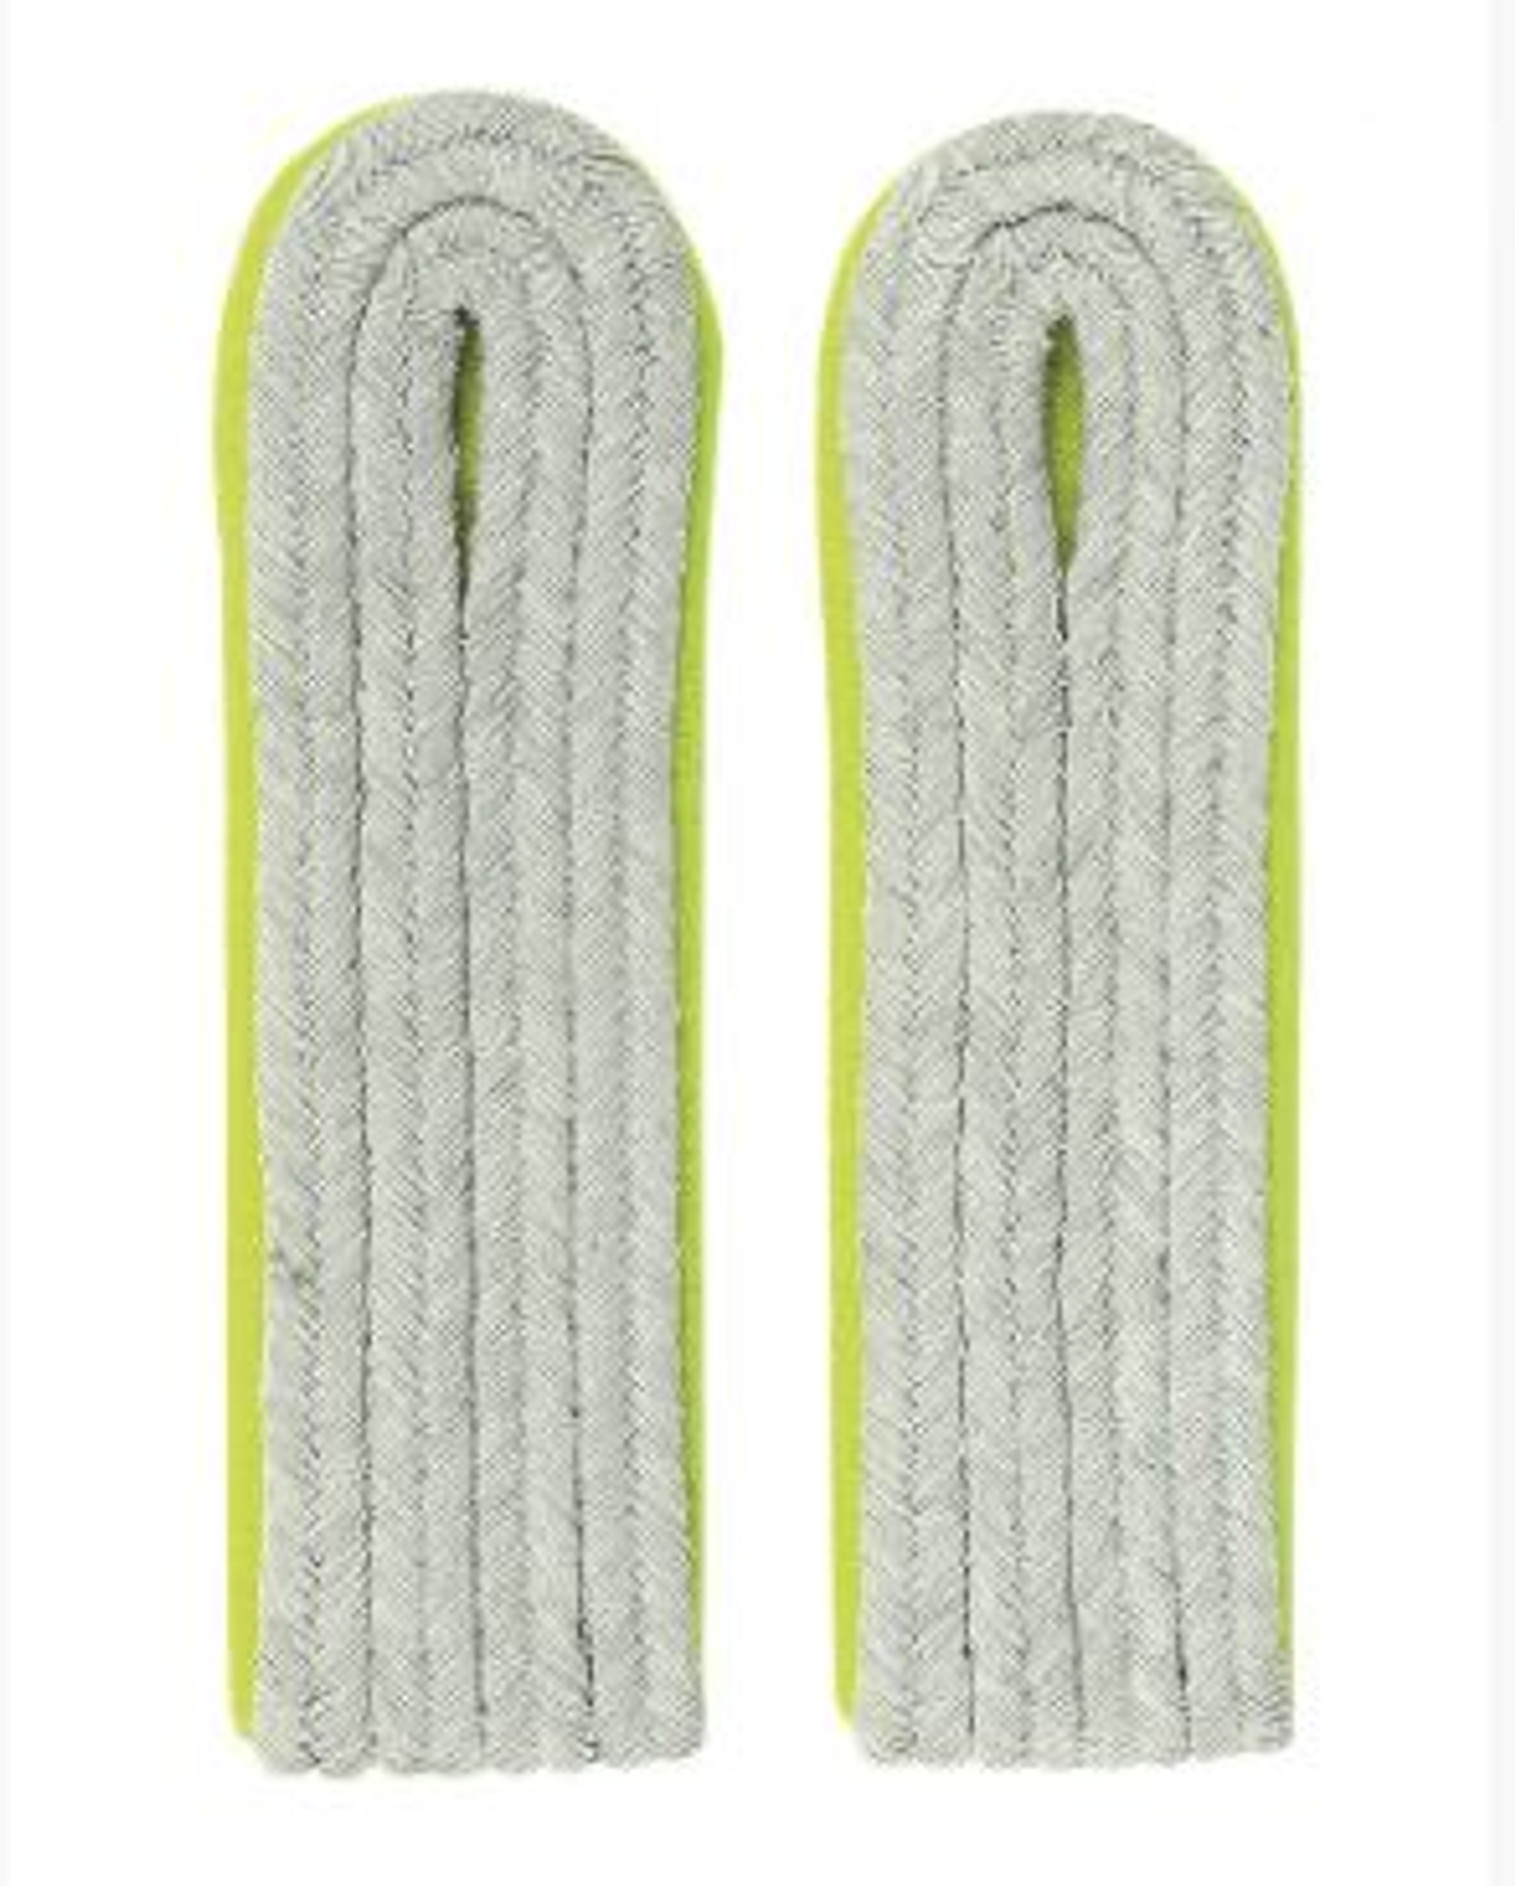 German Repro WWII Army Yellow Communications Lt. Shoulder Boards - Pair